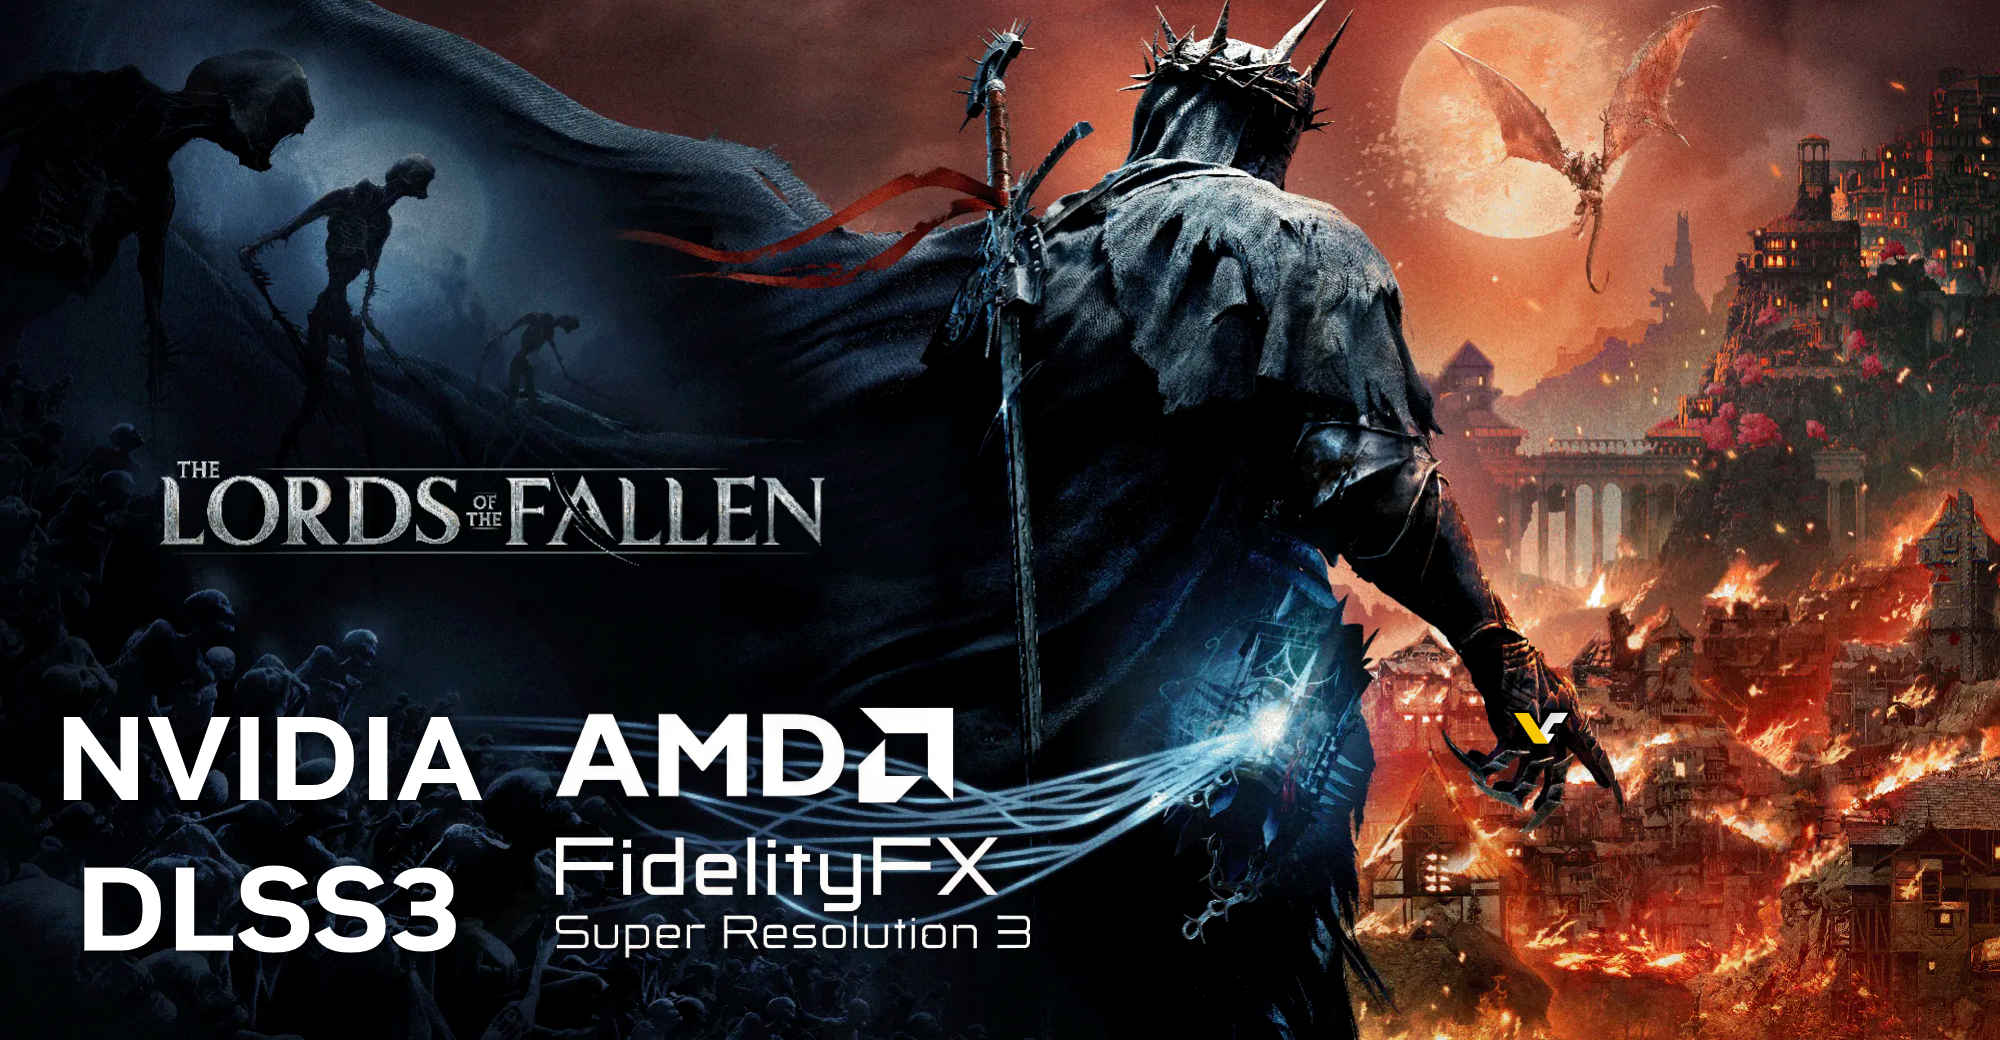 Lords of the Fallen PC requirements revealed: RTX 2080 recommended